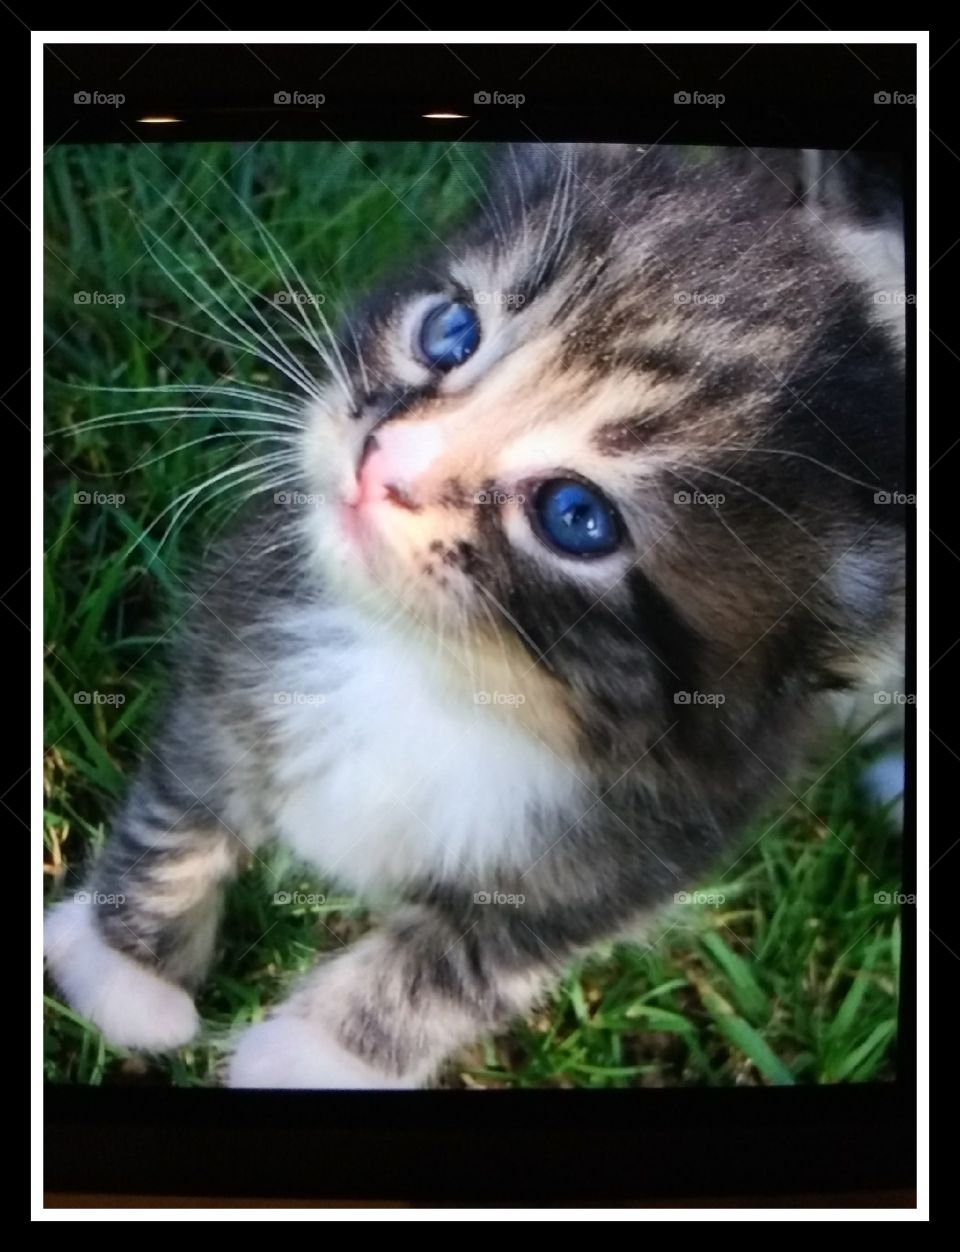 The blue eyed kitty